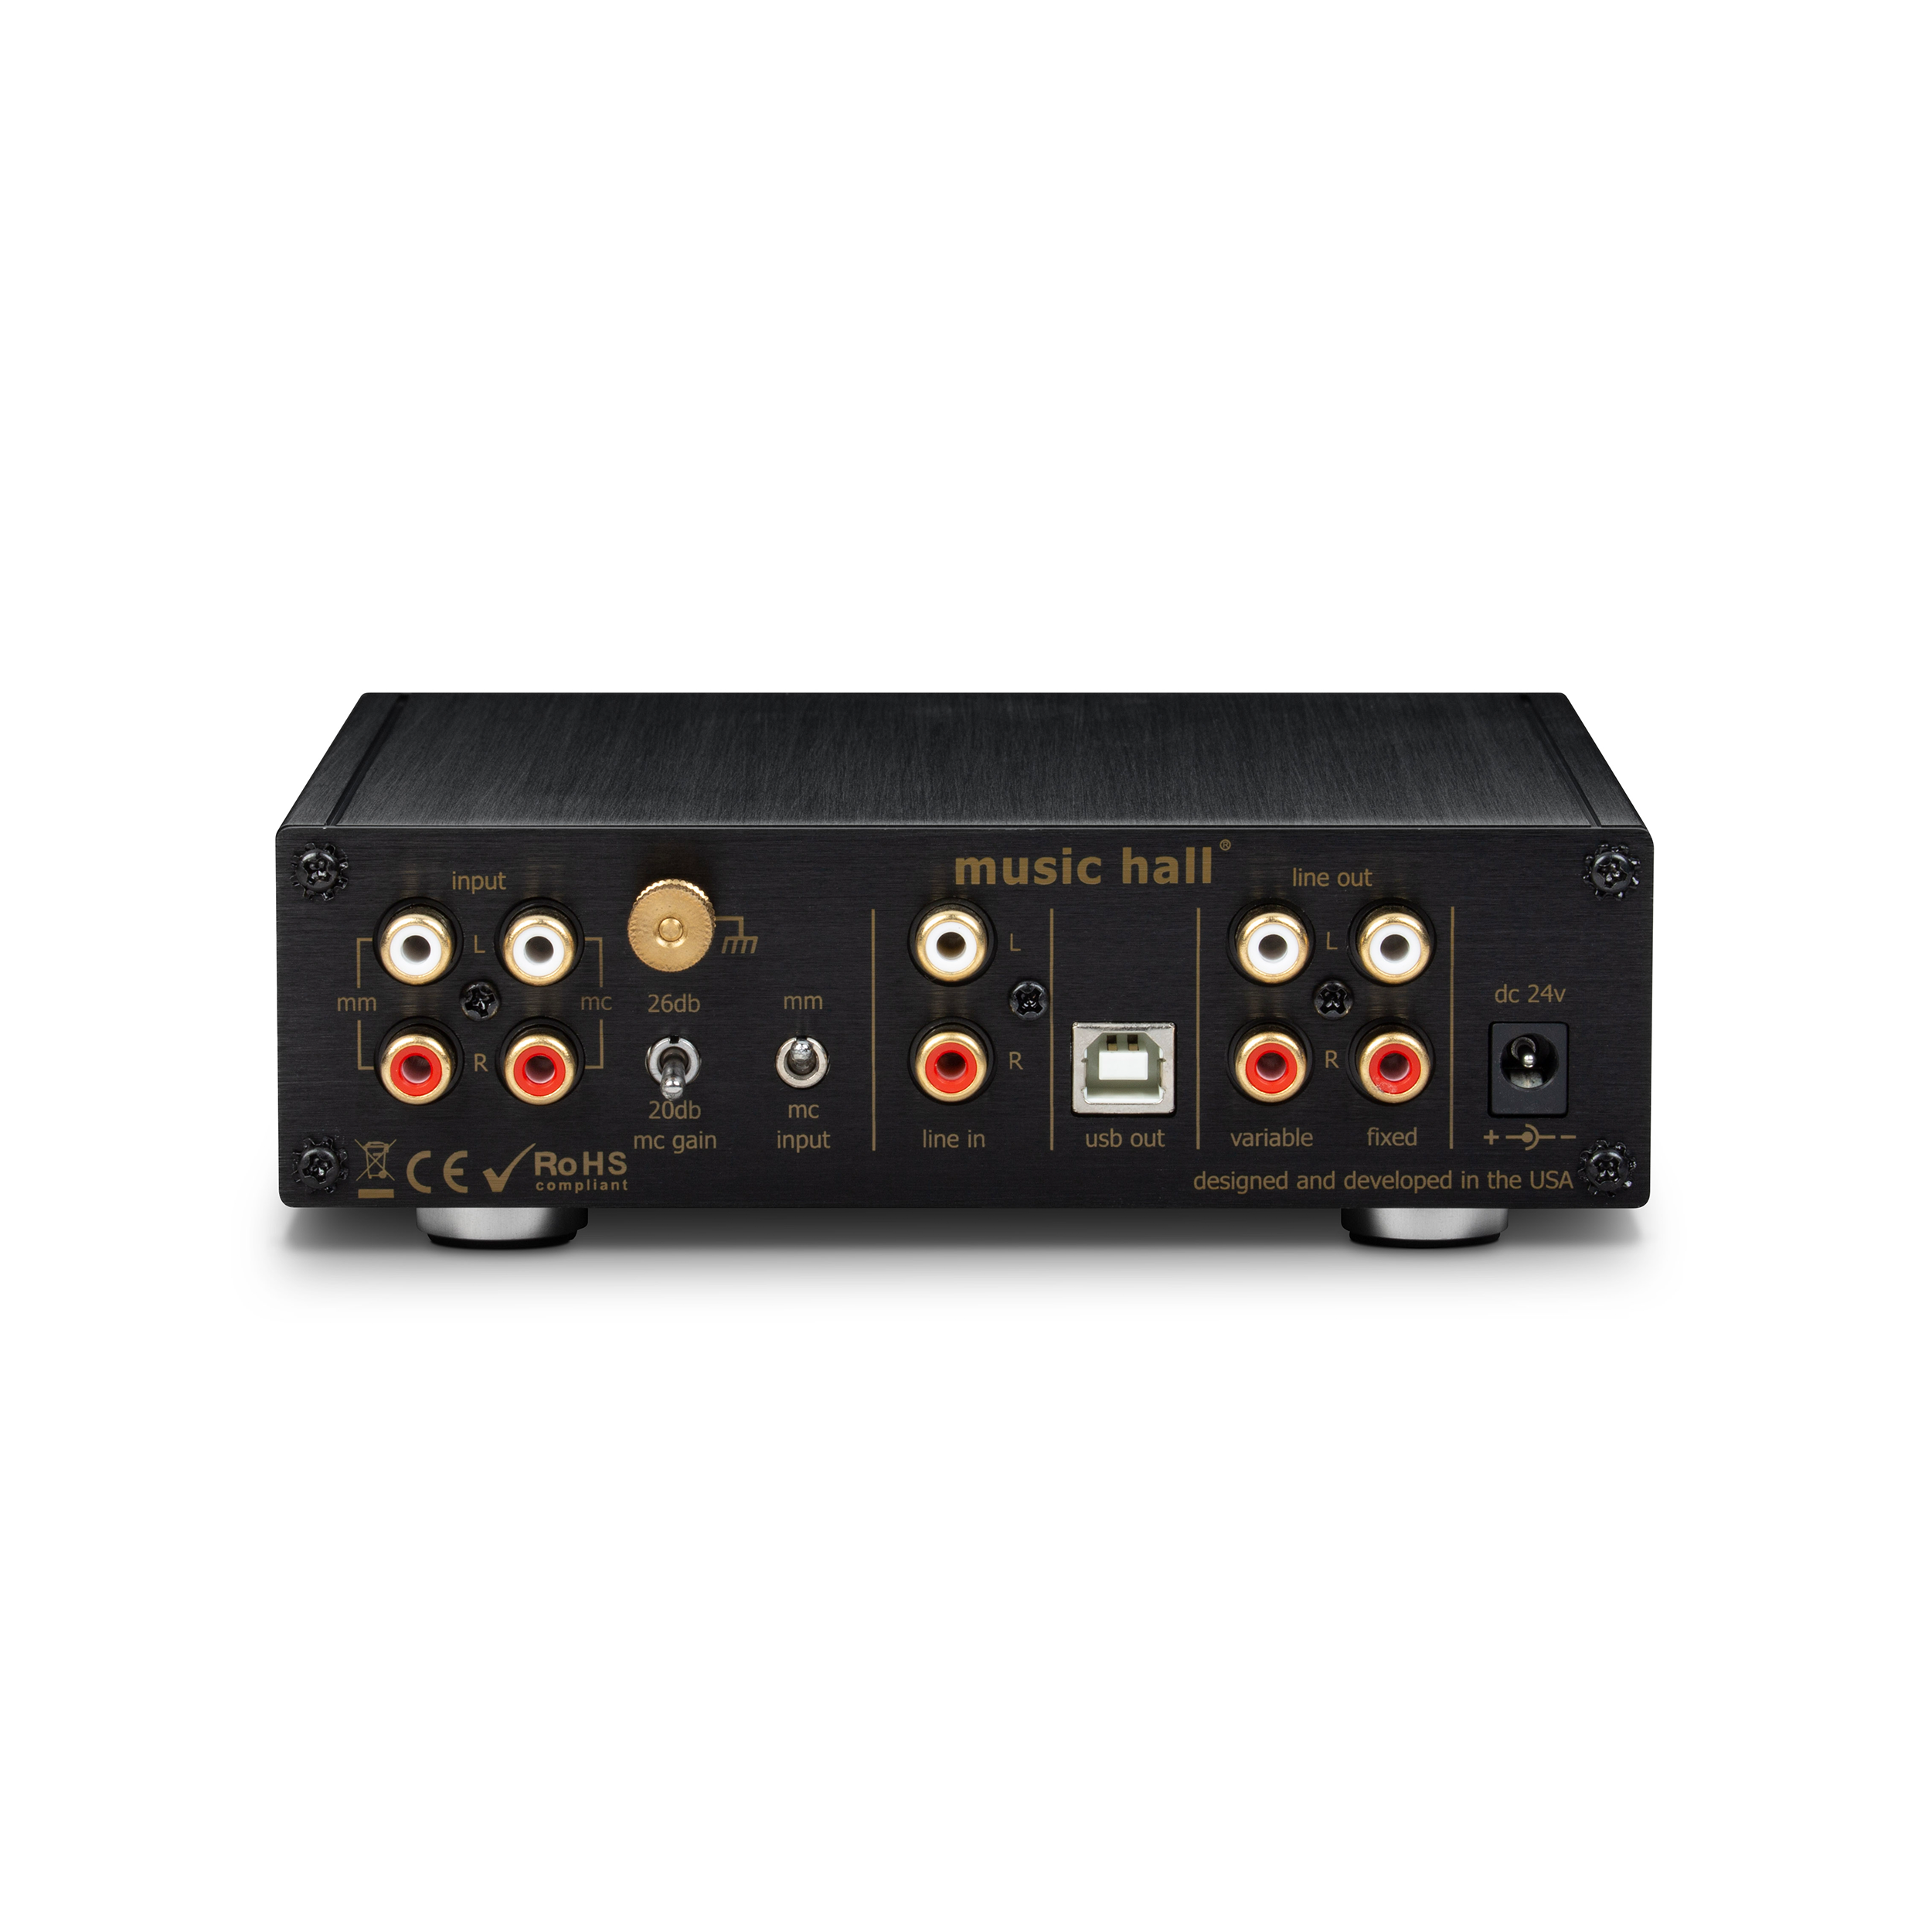 Music Hall pa2.2 Phono, A2D, & Headphone Preamplifier